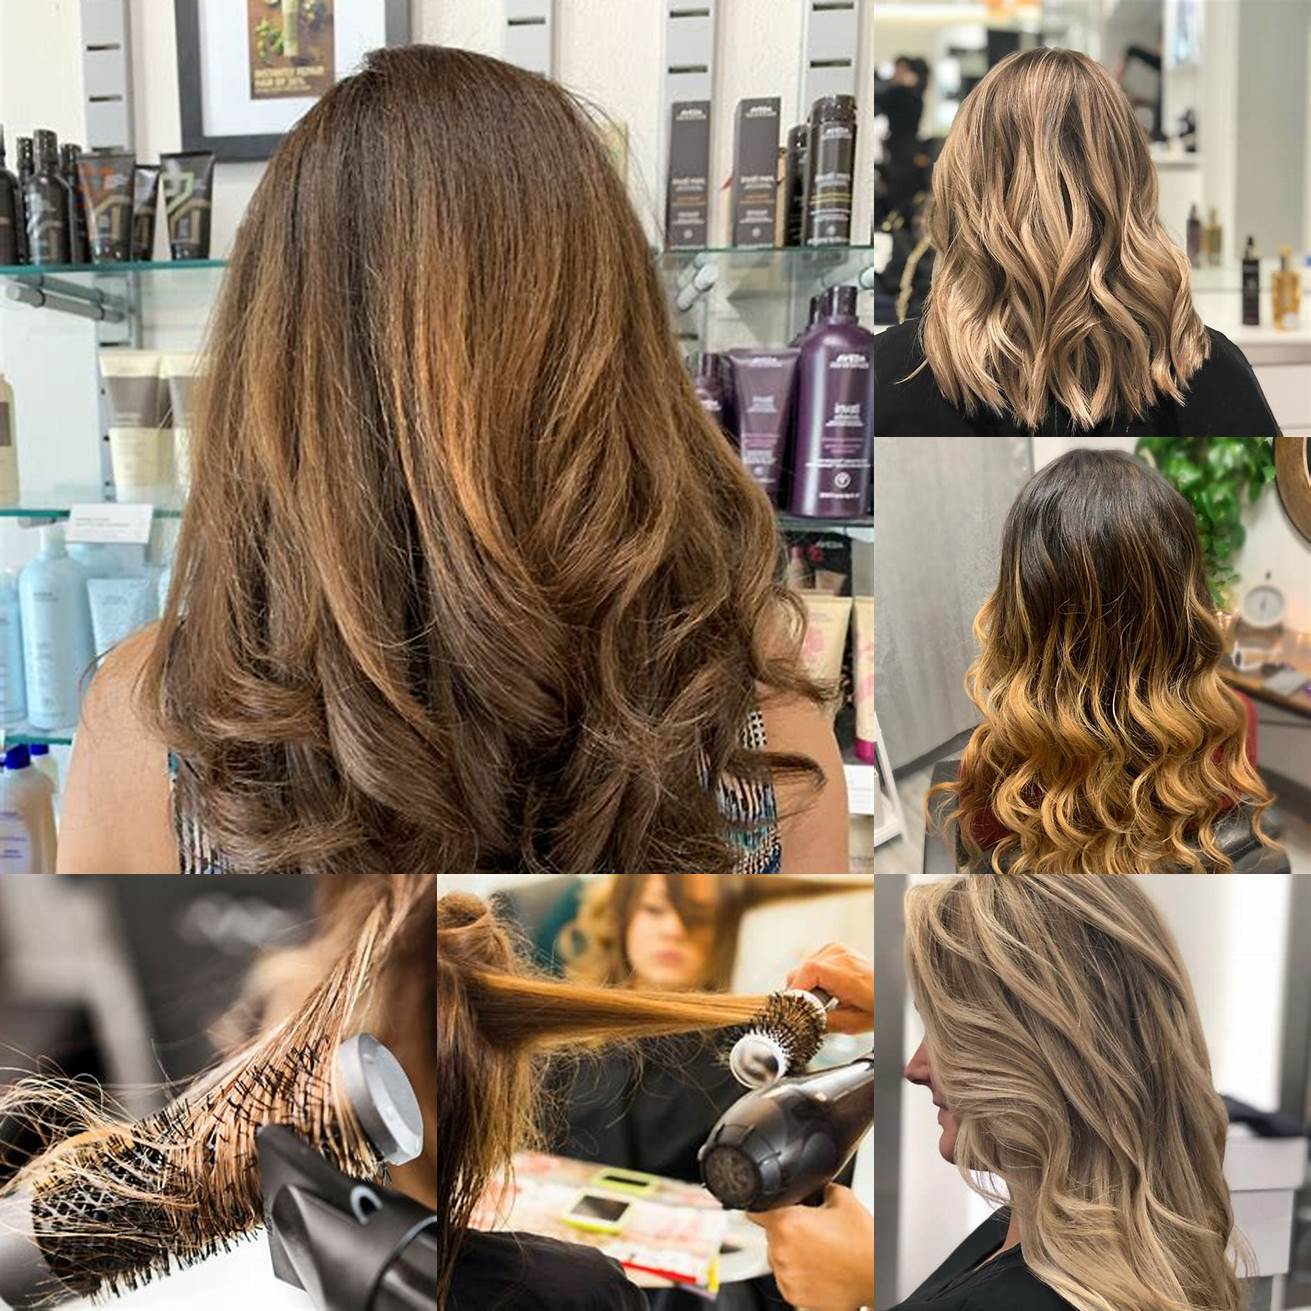 Blowouts and Styling Whether youre getting ready for a special occasion or just want to look your best M Et V Coiffure can help you achieve the perfect hairstyle